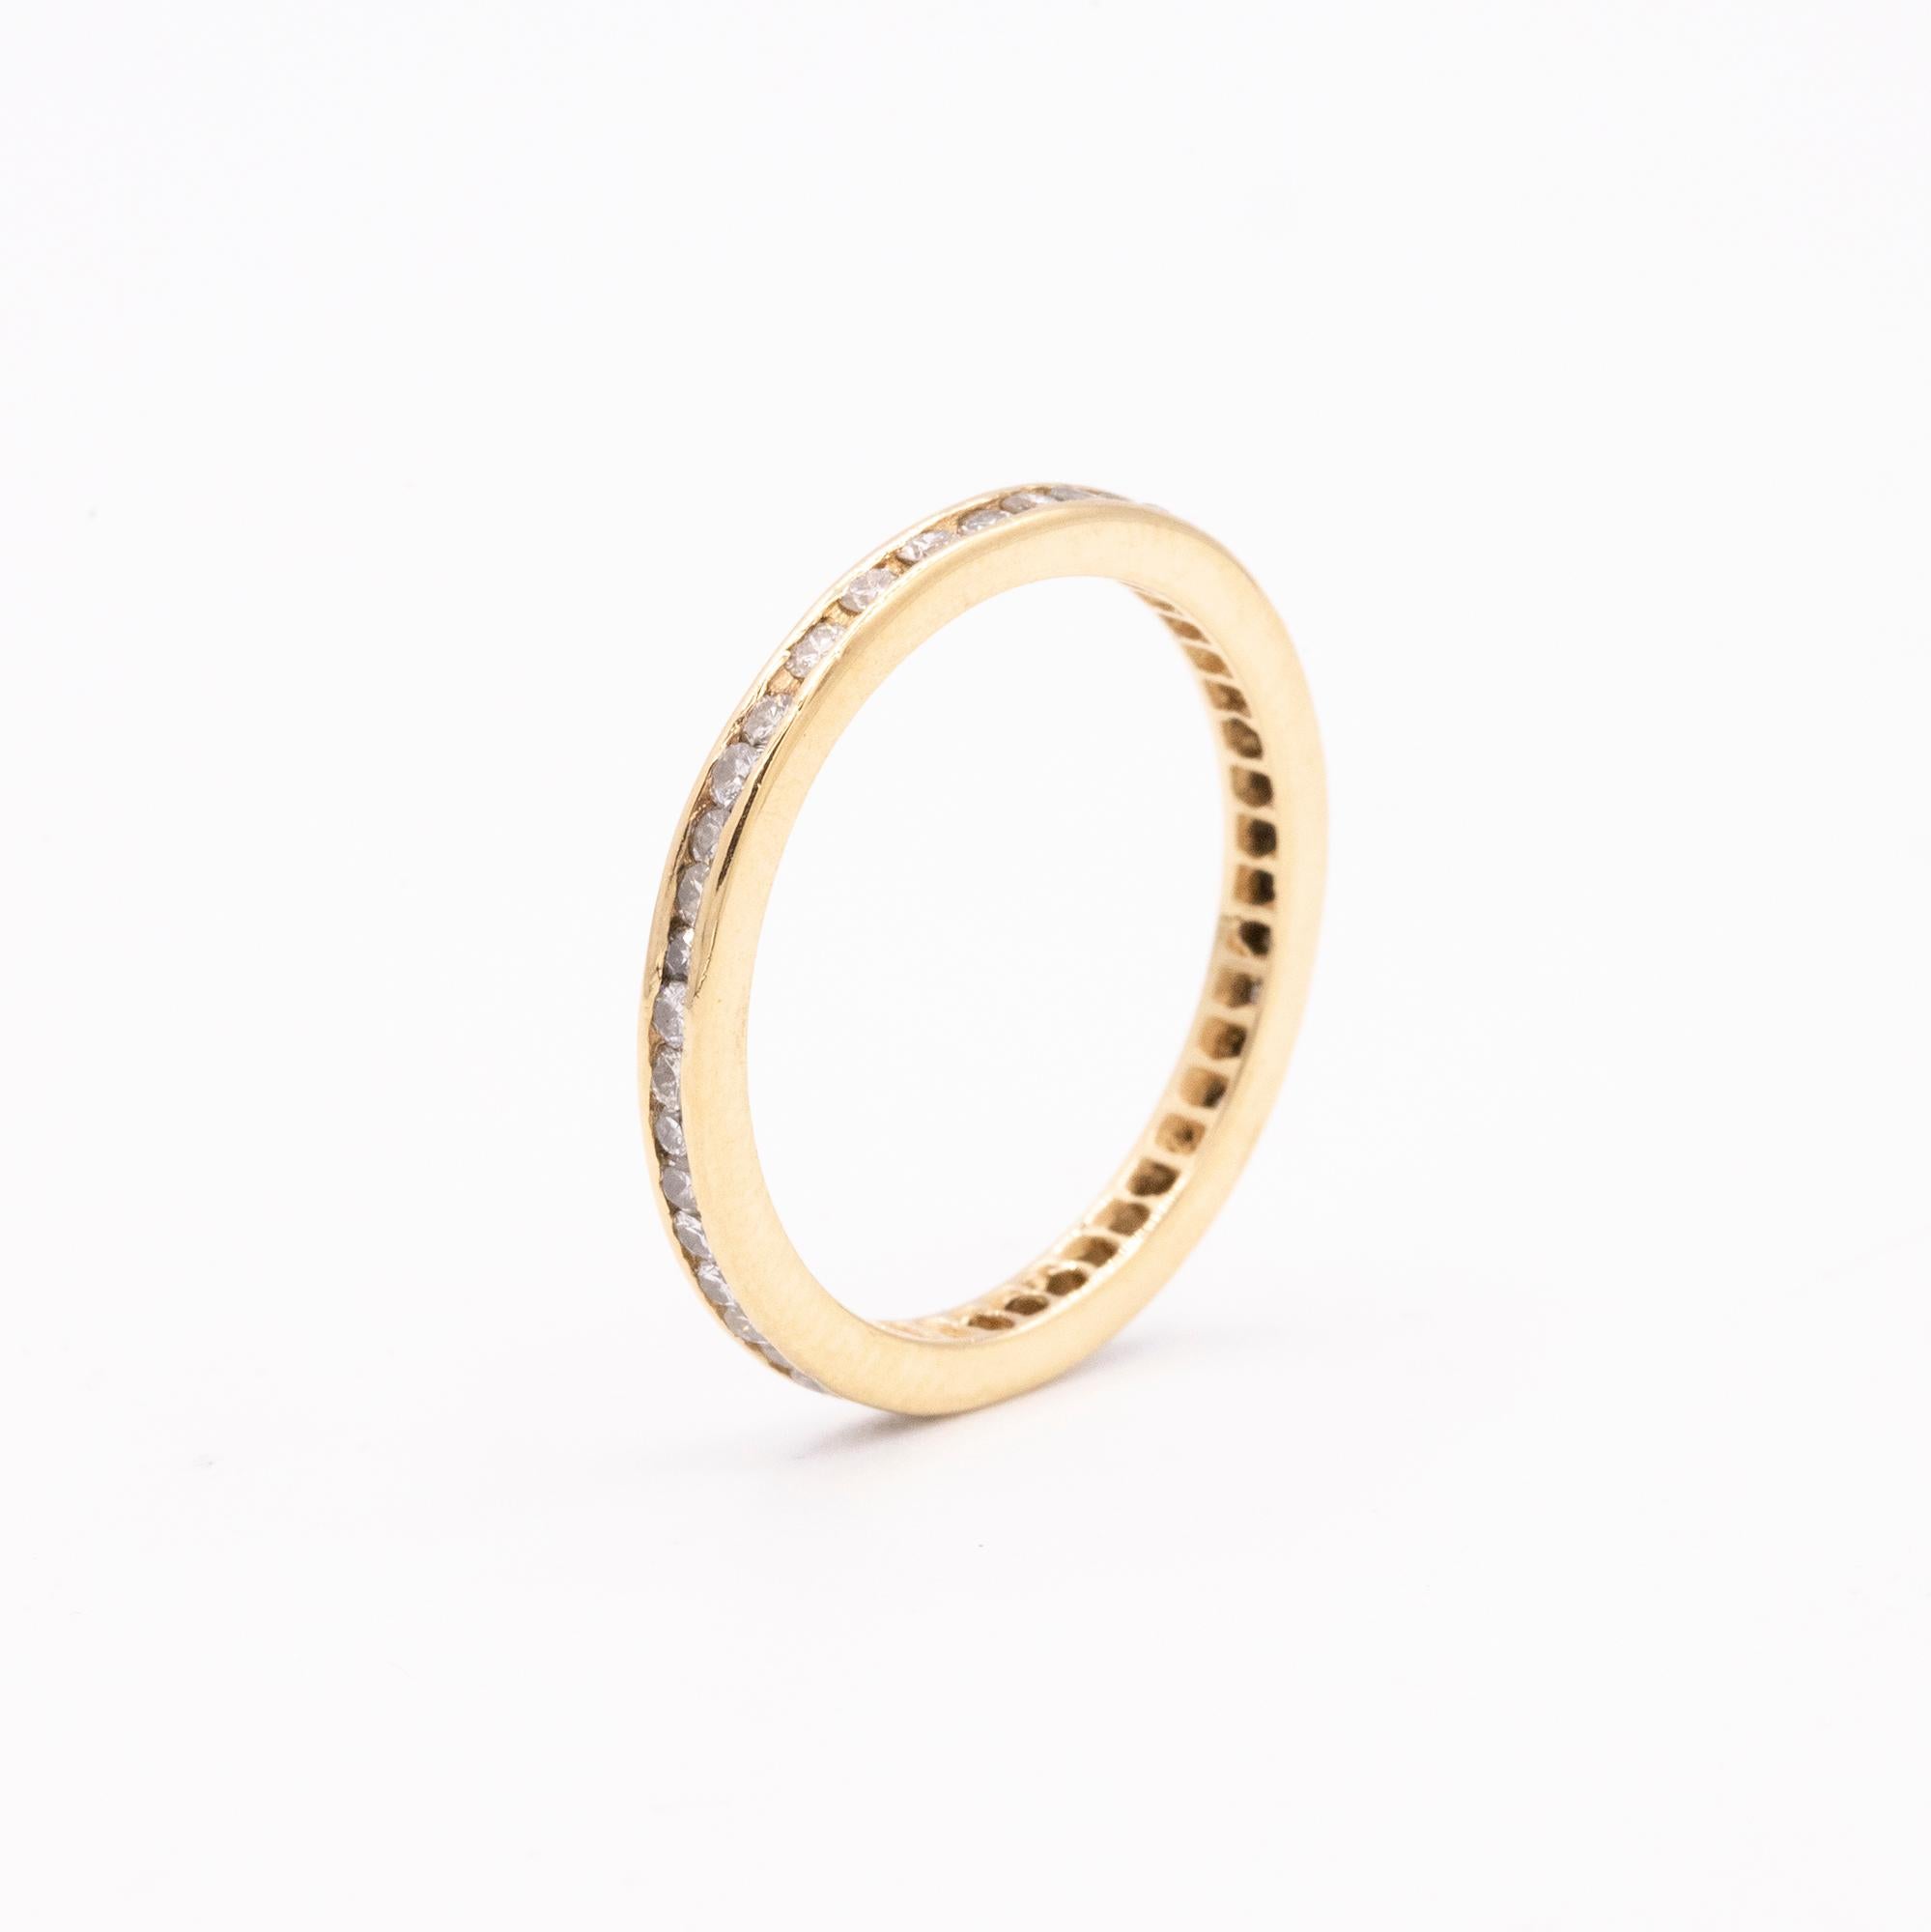 Vintage 14kt Yellow Gold Diamond Eternity Band. 2mm in width. The band has 40 channel set round brilliant diamonds.